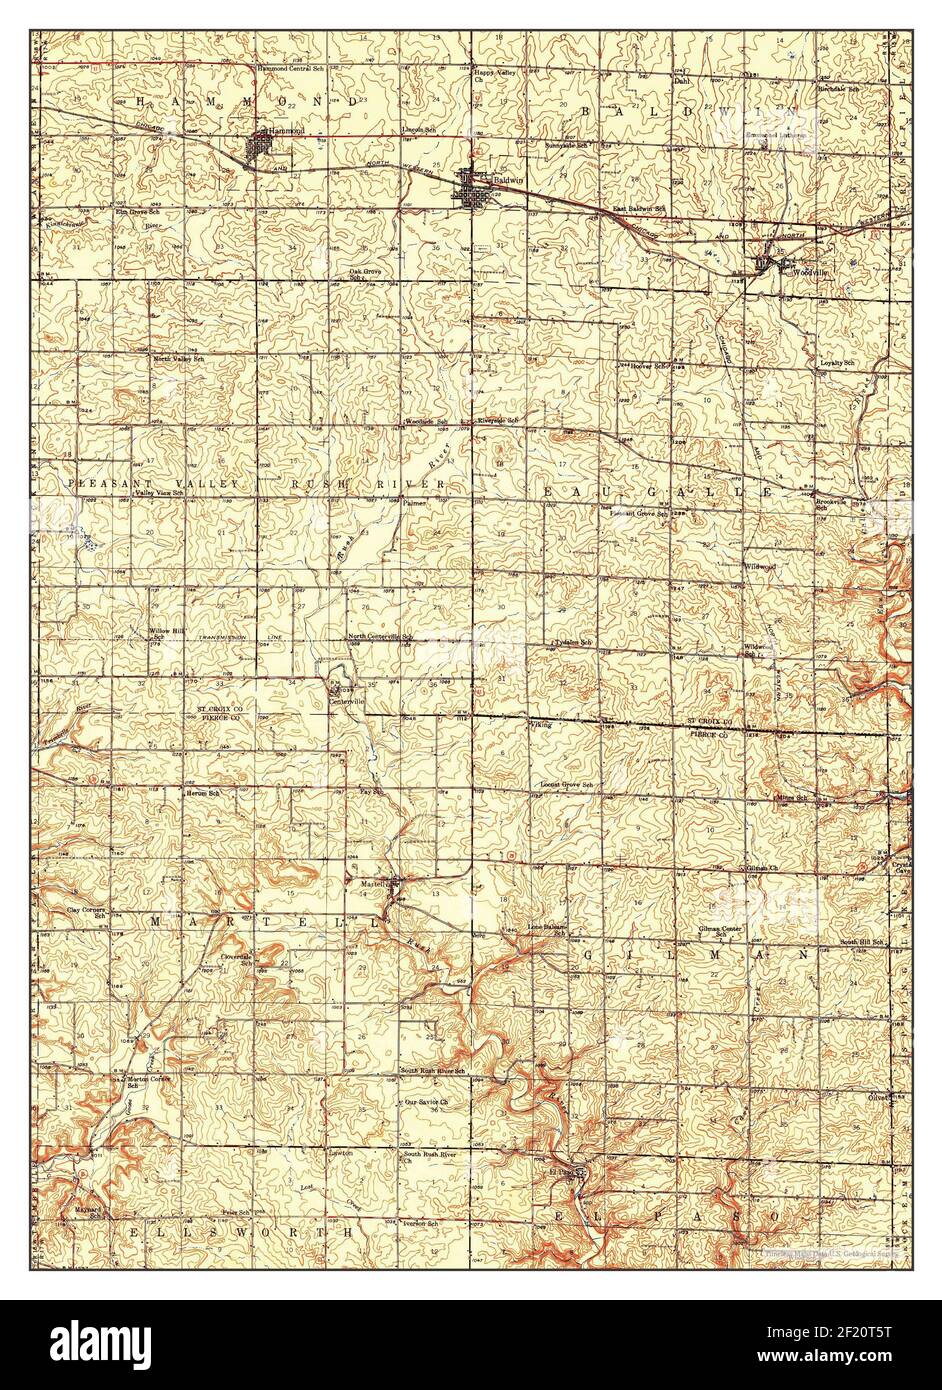 Baldwin Wisconsin Map 1949 162500 United States Of America By Timeless Maps Data Us Geological Survey 2F20T5T 